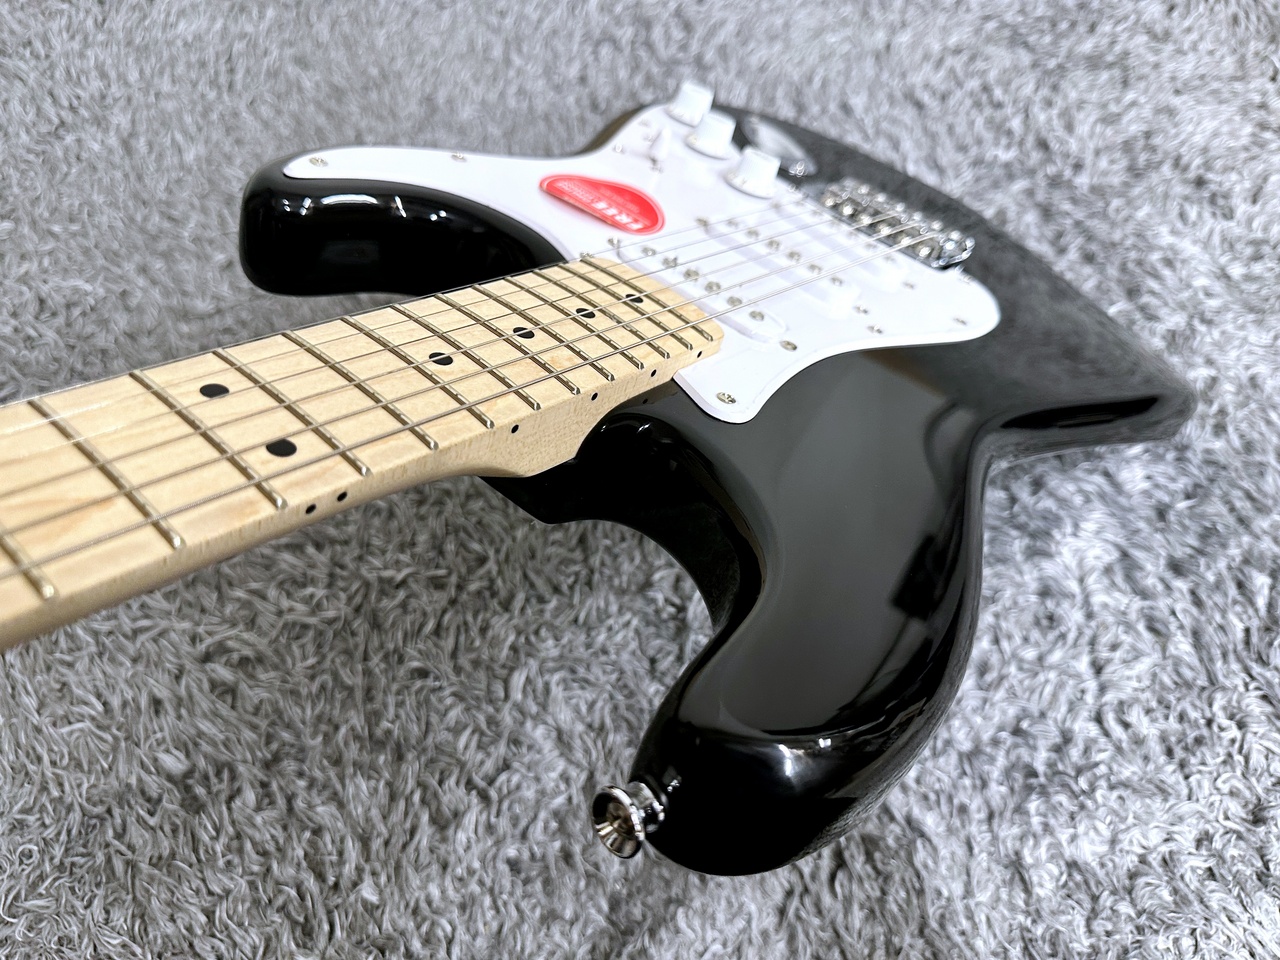 Squier by Fender Sonic Stratocaster Black / Maple